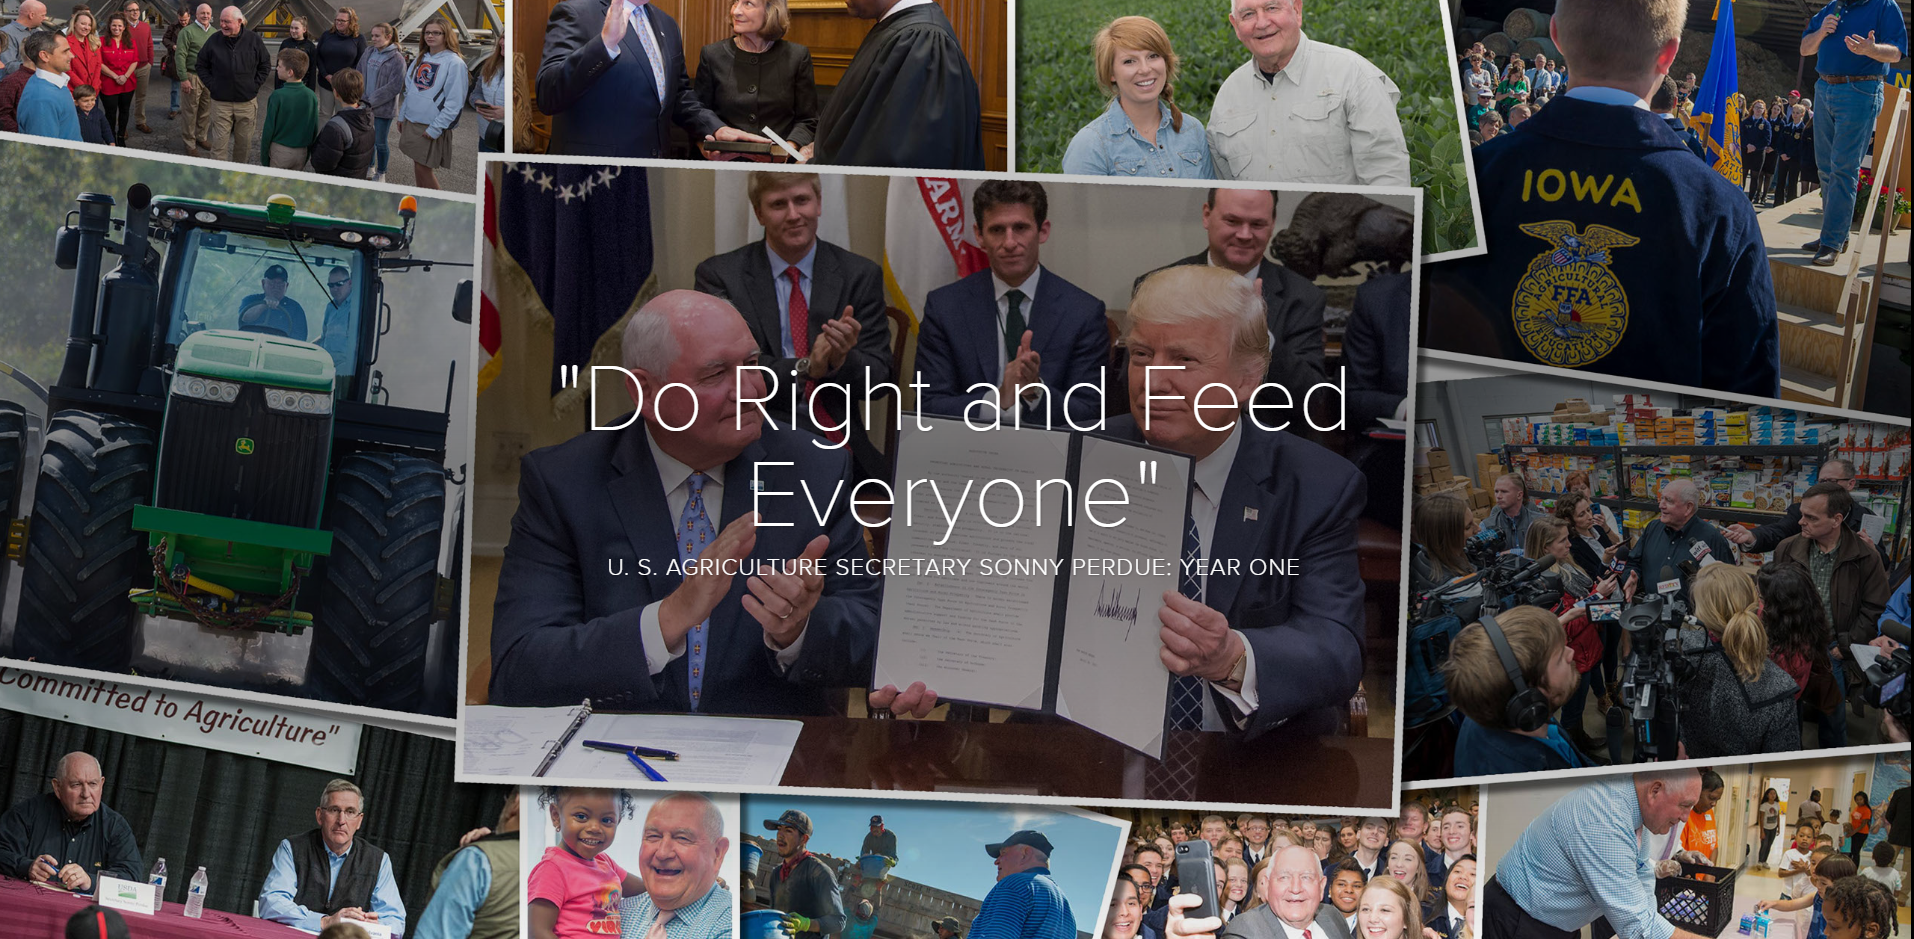 "Do Right and Feed Everyone" - U.S. Agriculture Secretary Sonny Perdue: Year One graphic